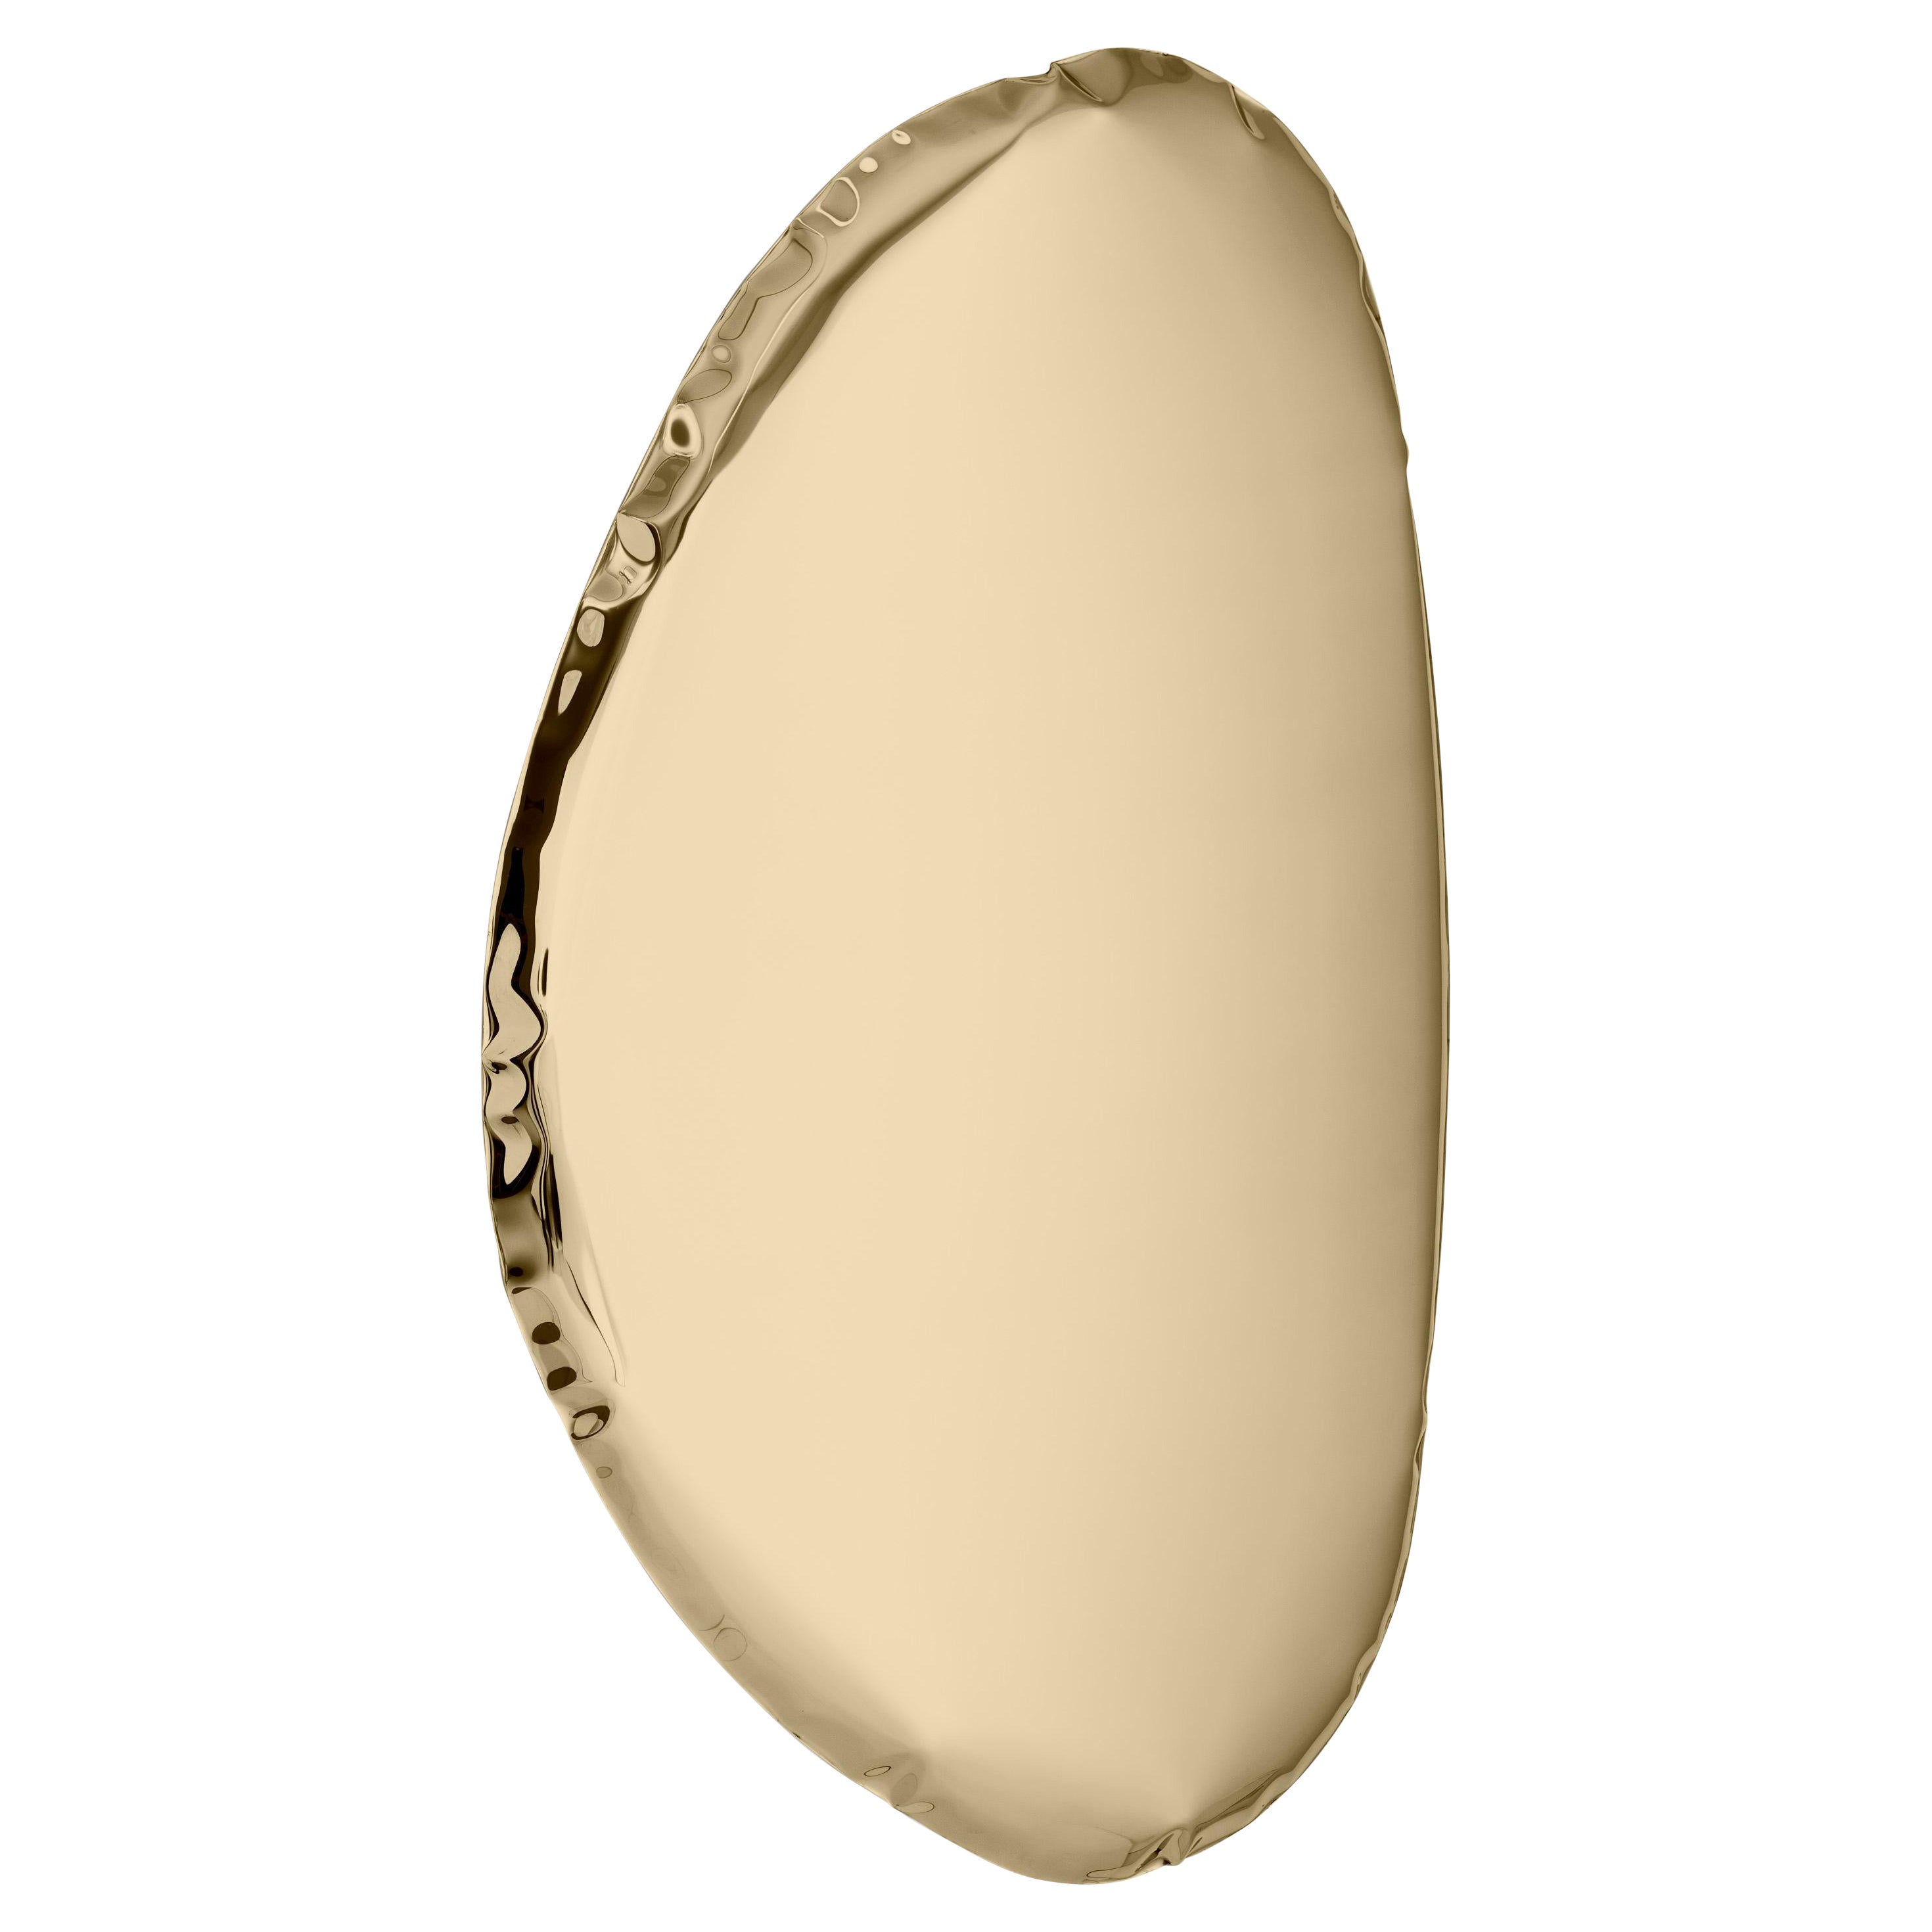 Tafla O3 Polished Stainless Steel Classic Gold Color Wall Mirror by Zieta